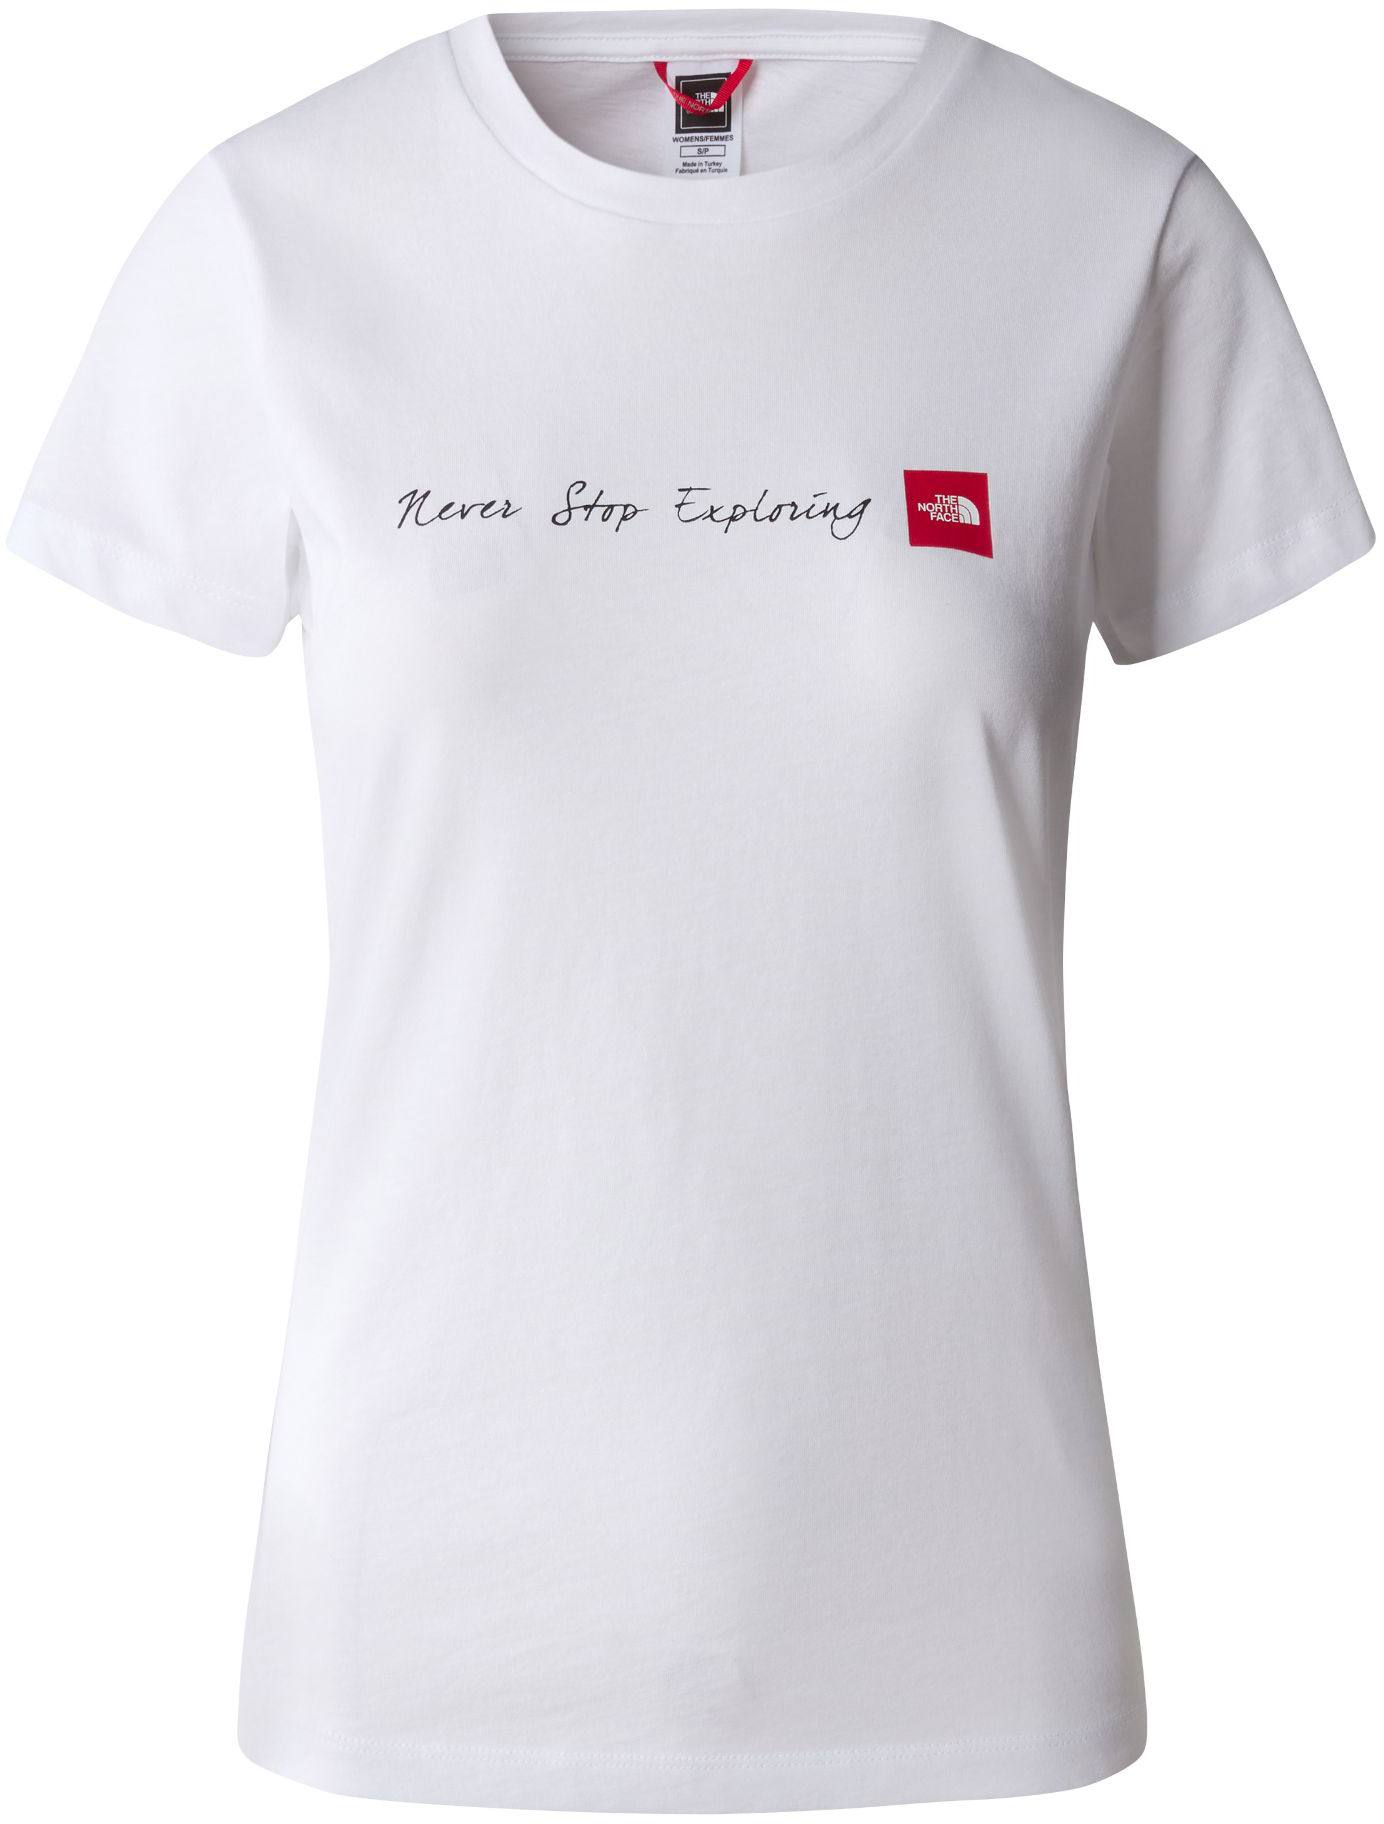 Image of The North Face Women's Never Stop Exploring Tee